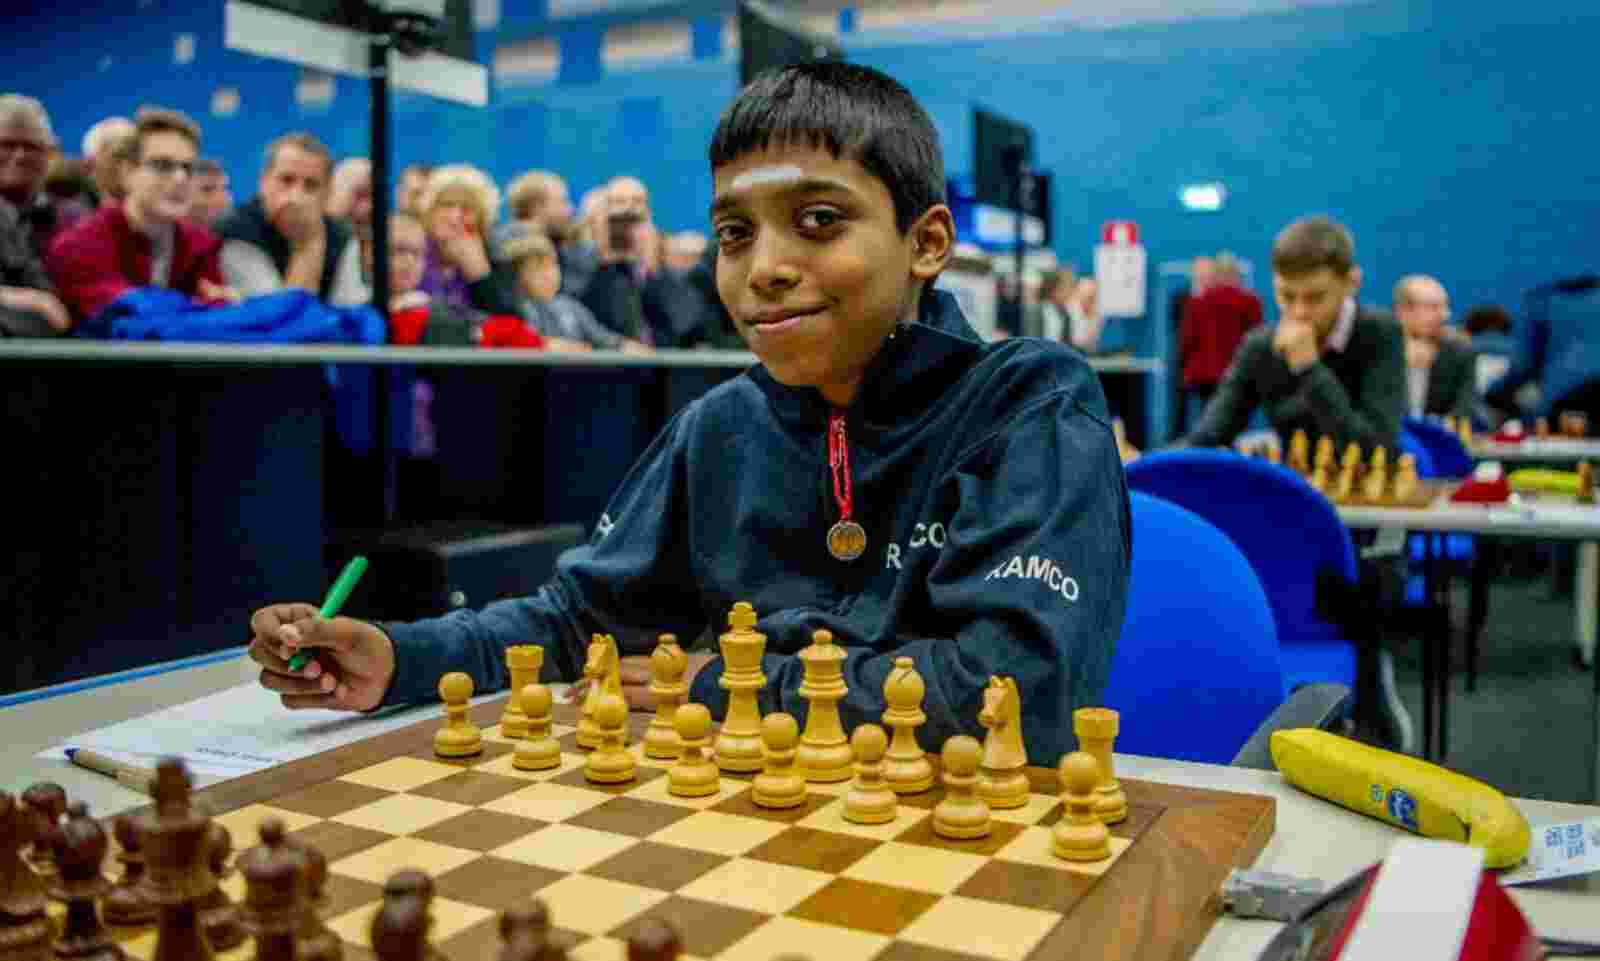 Chess players in India  Chess legend Viswanathan Anand on motivation and  consistency in the game - Telegraph India